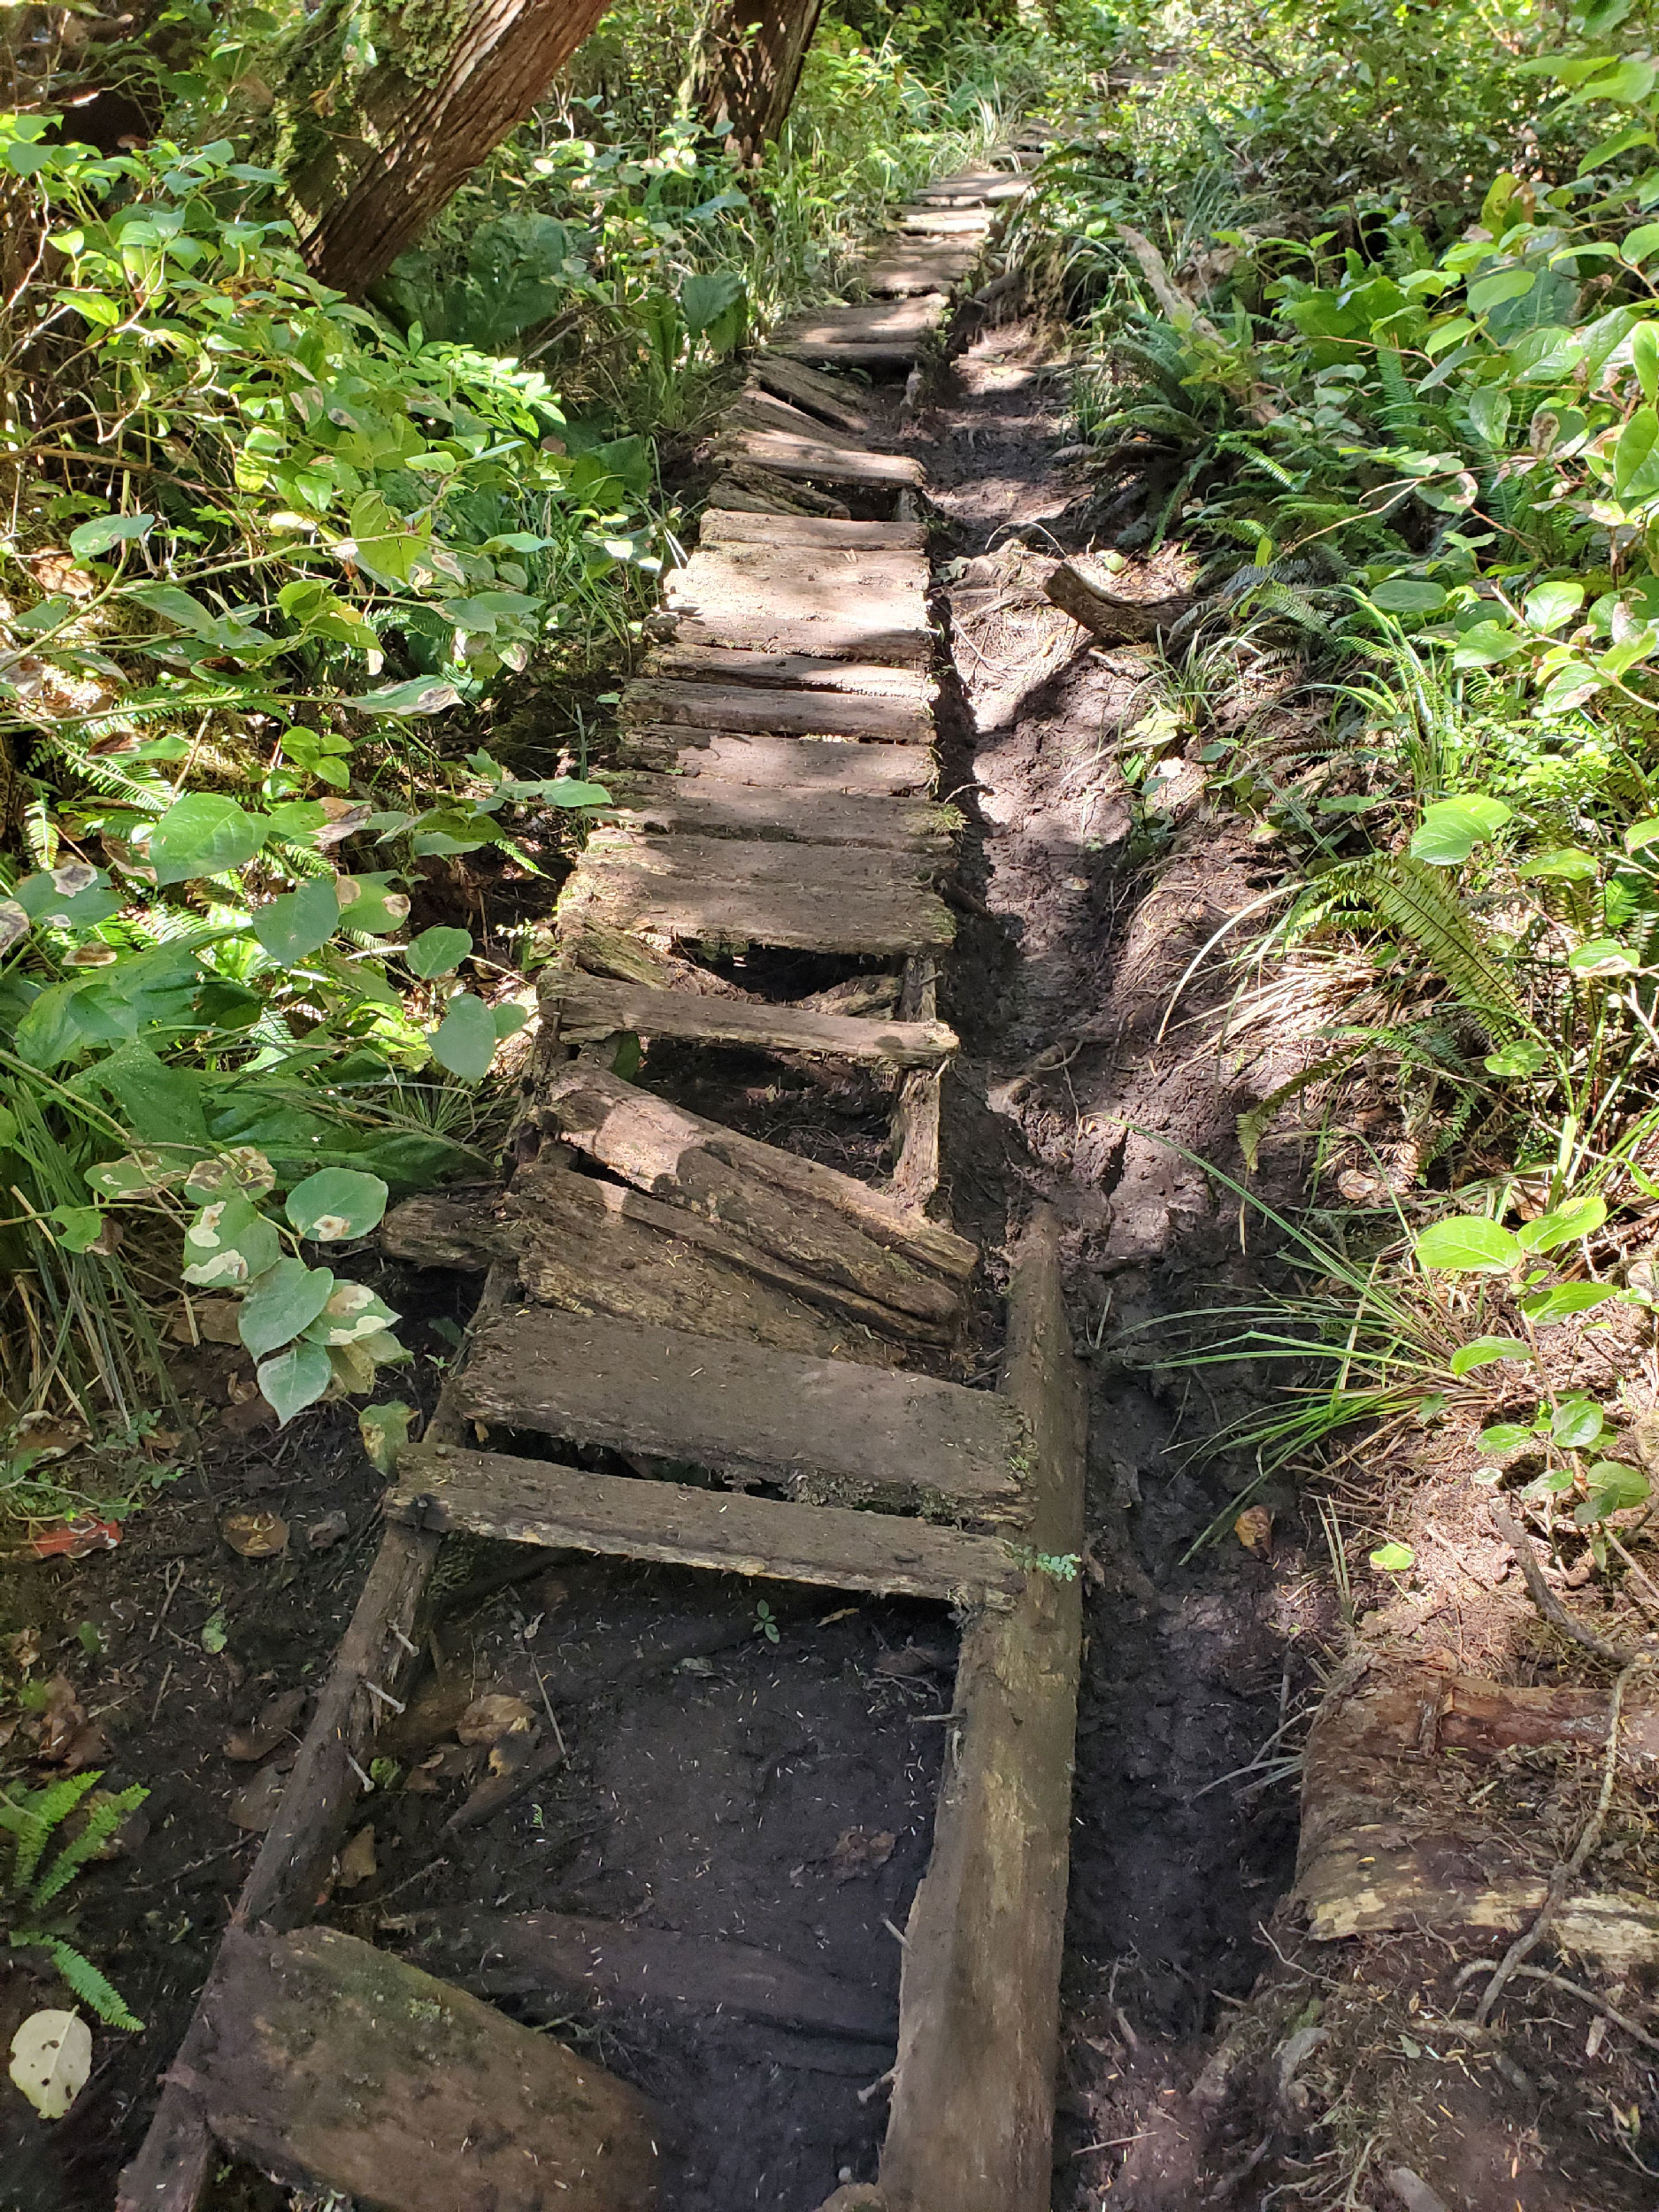 A broken and rotted boardwalk.